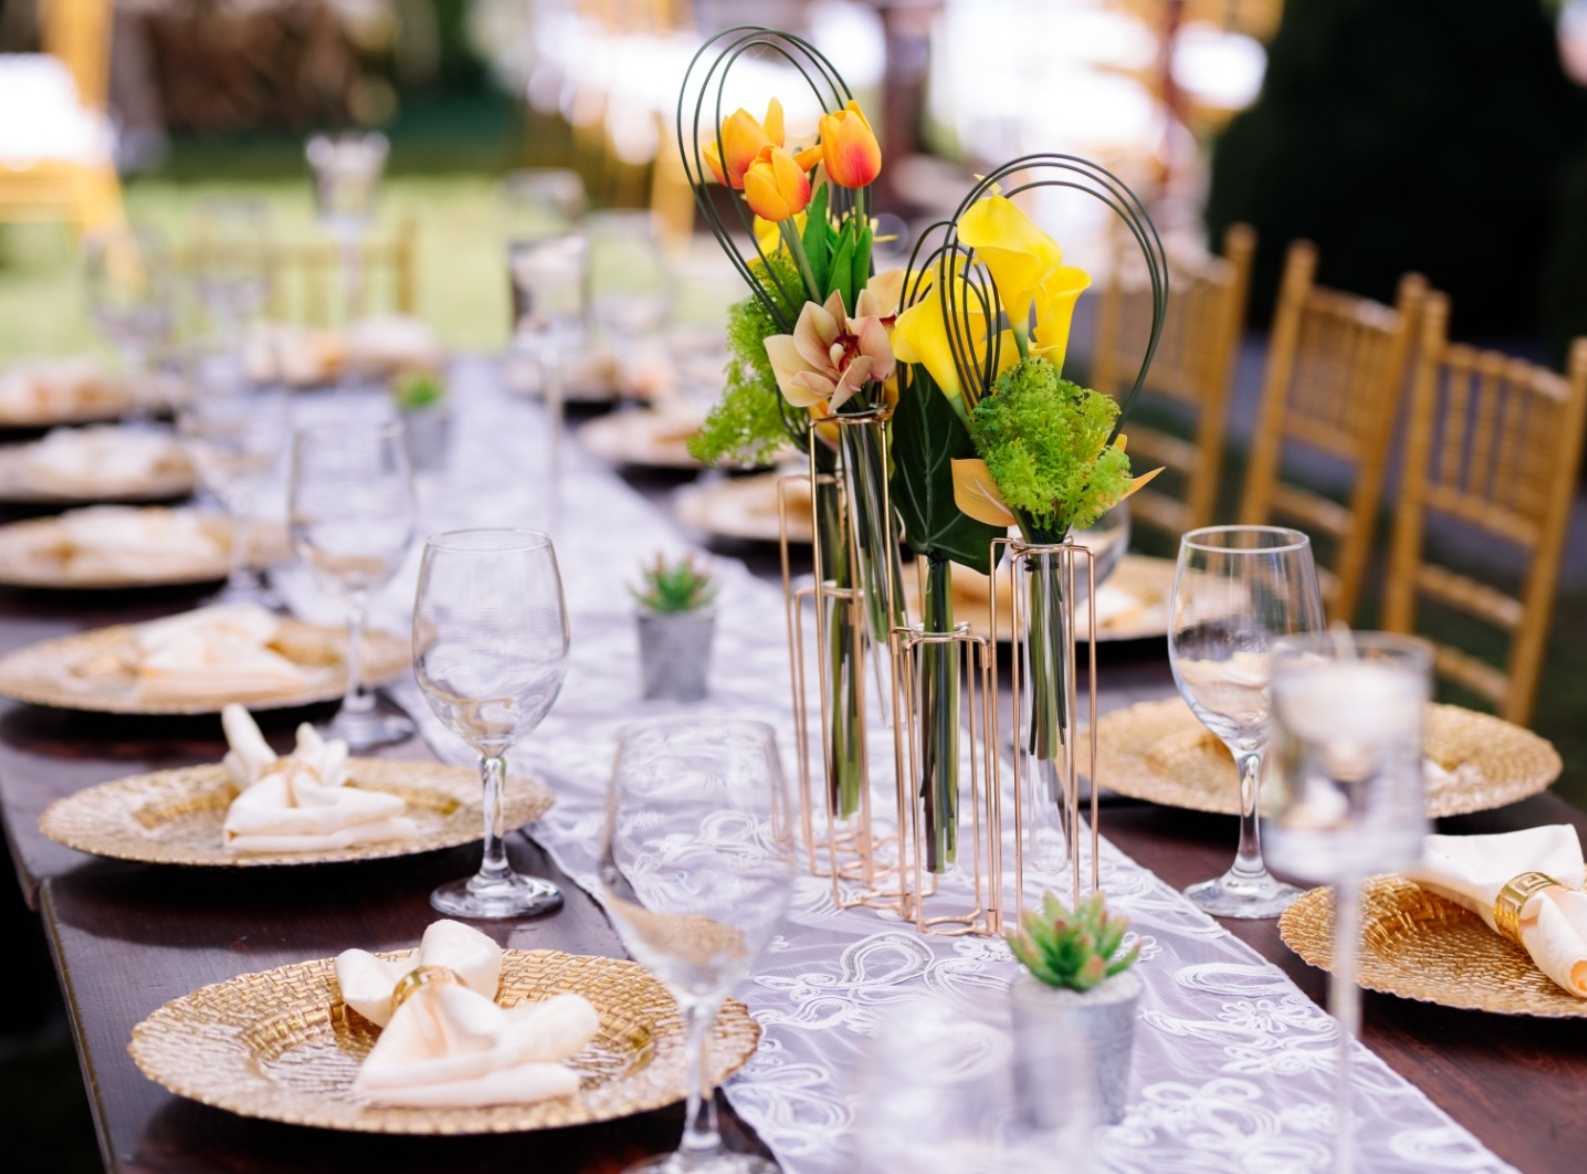 Elegant table set with plates, napkins and flower centerpieces